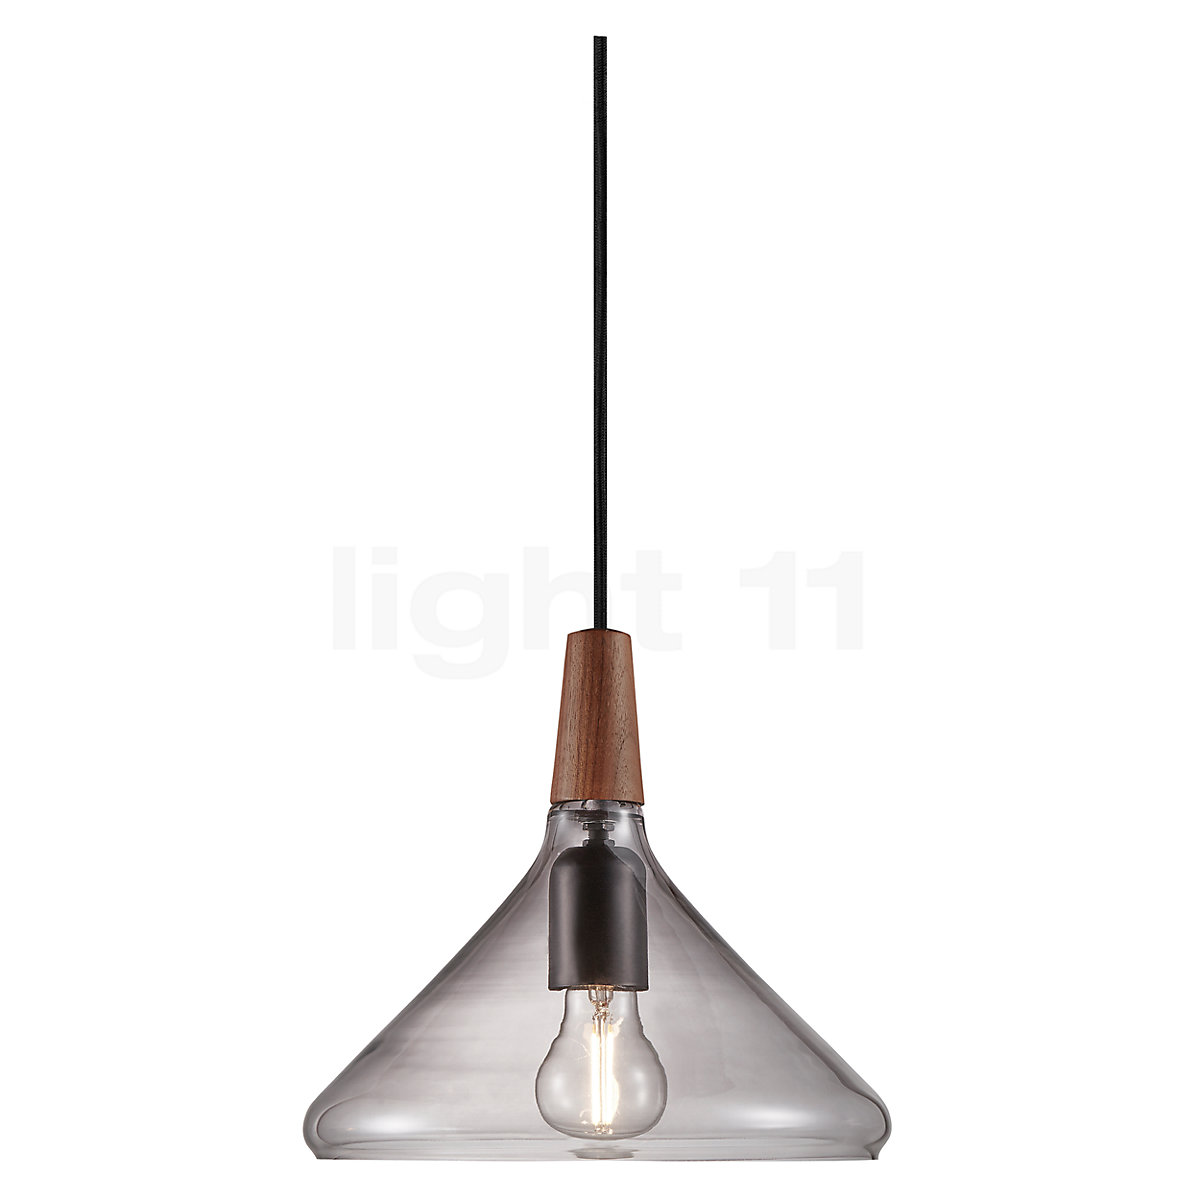 People at Pendant Design for Buy Nori the Light